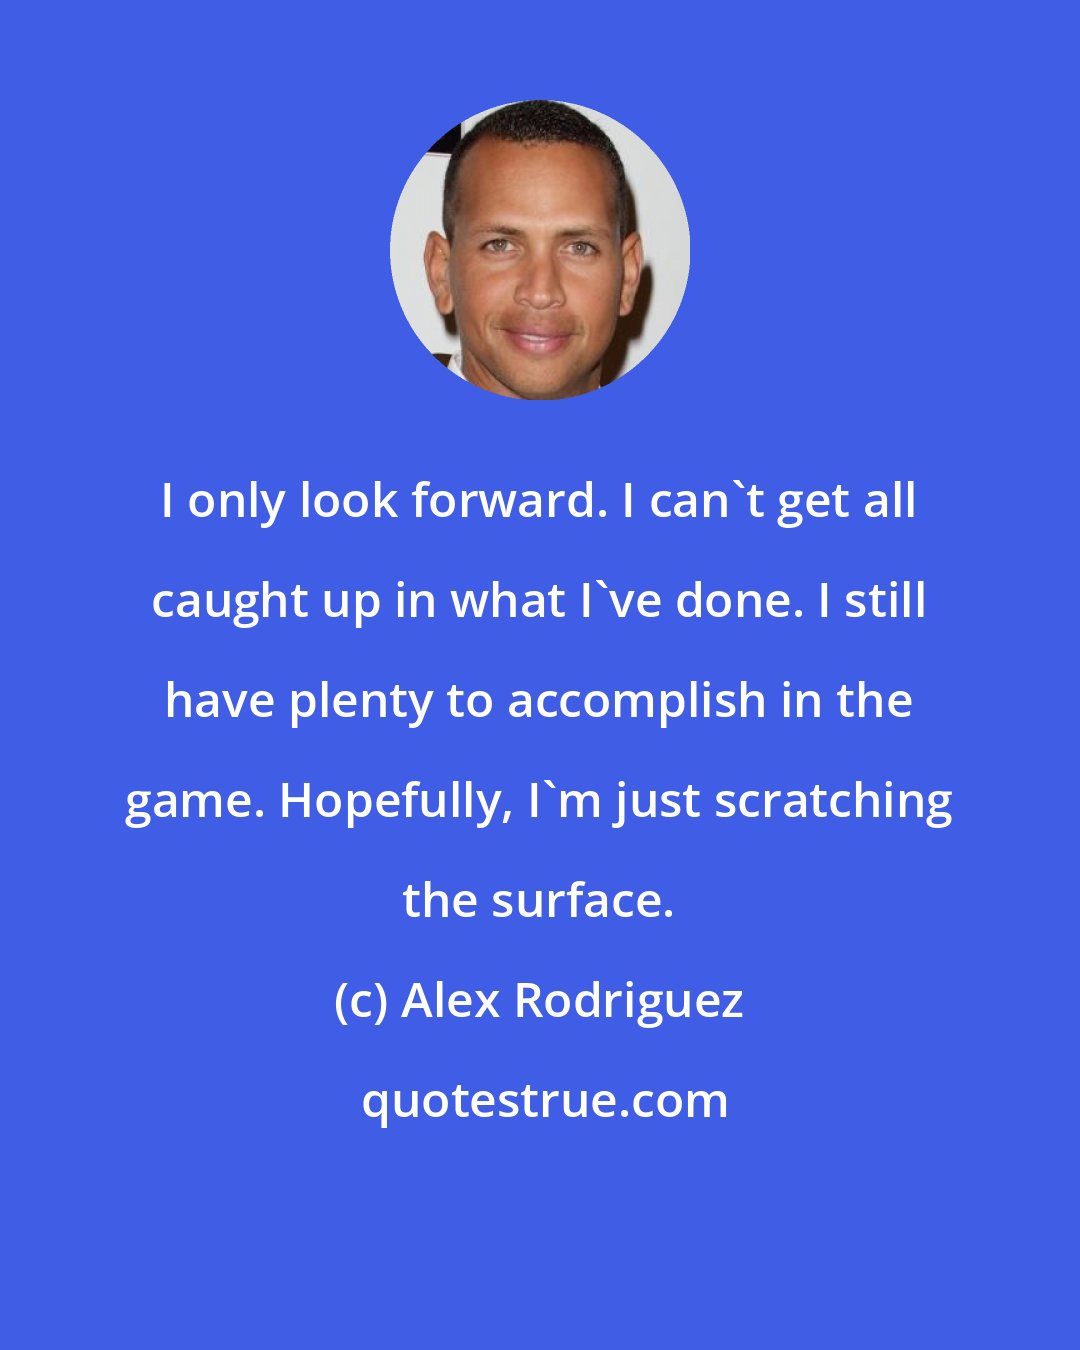 Alex Rodriguez: I only look forward. I can't get all caught up in what I've done. I still have plenty to accomplish in the game. Hopefully, I'm just scratching the surface.